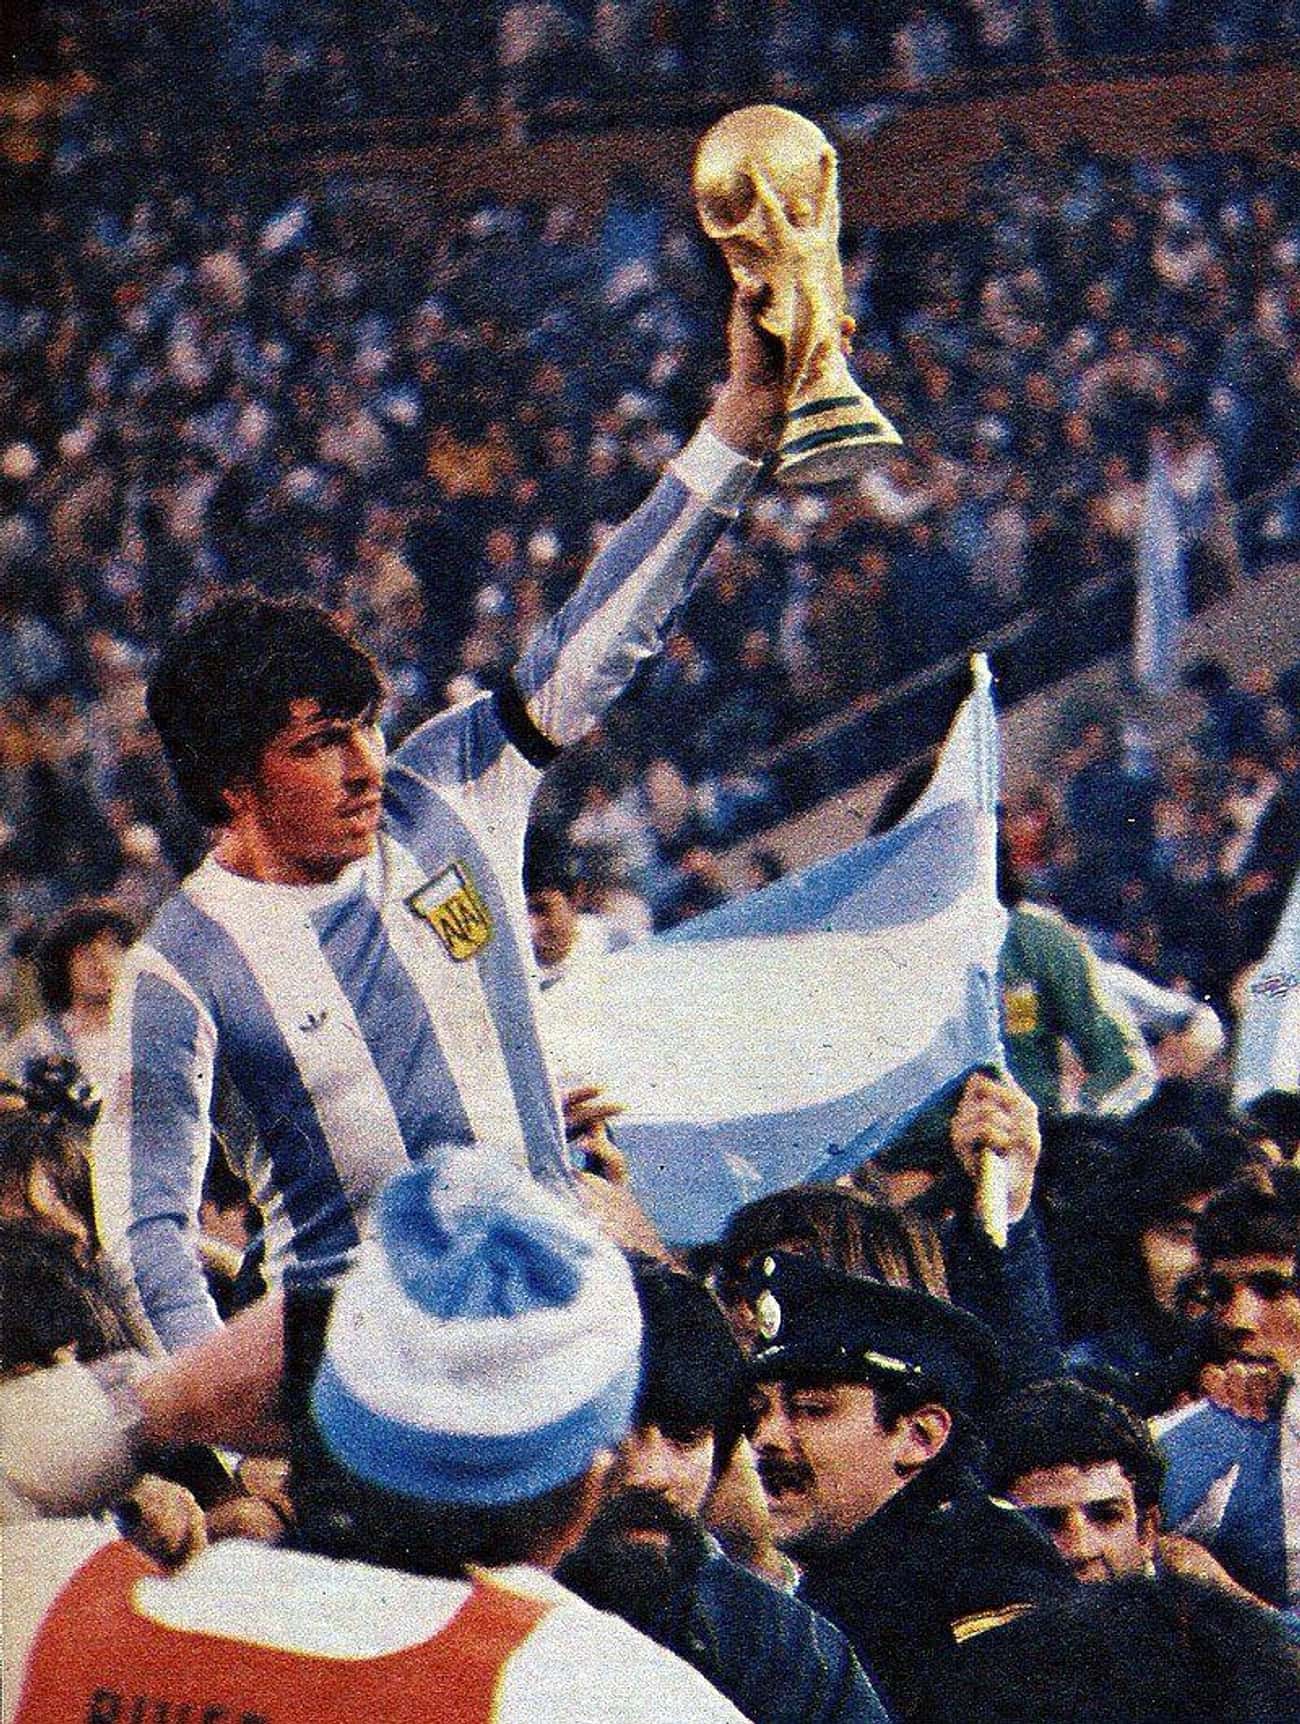 Argentina 1978 - The Dirtiest World Cup Ever 